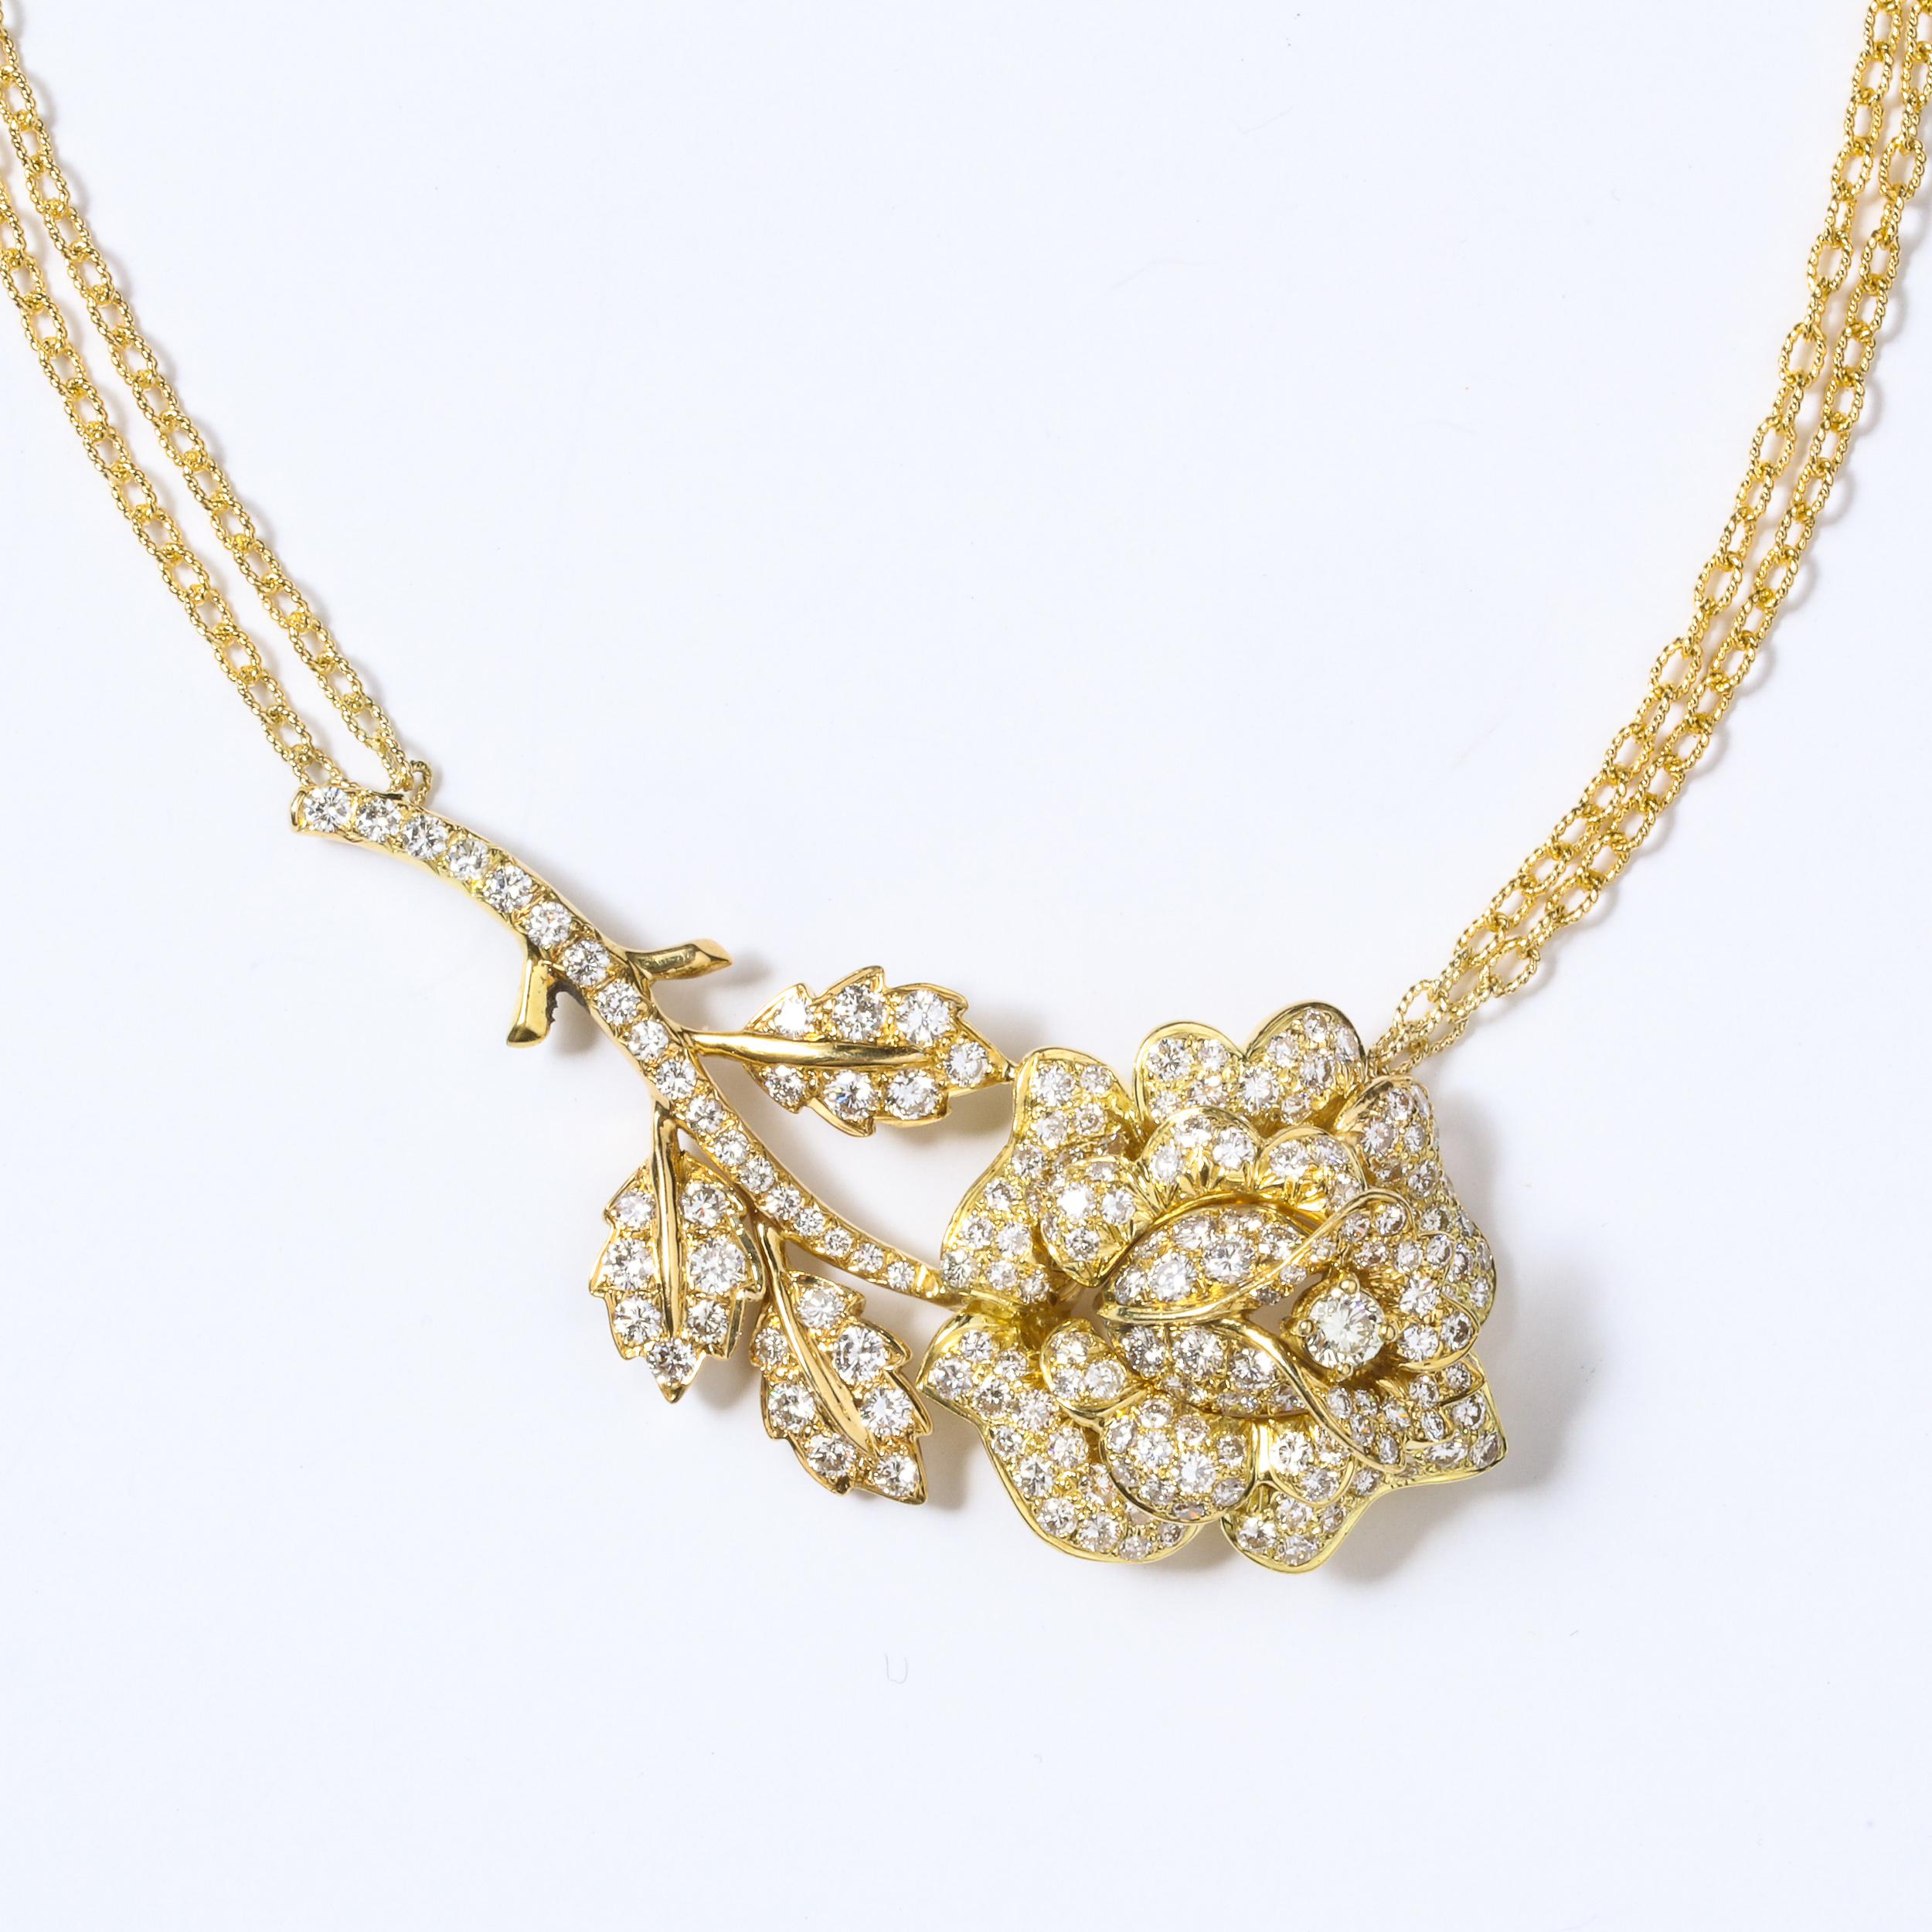 Modernist Stylized Rose Pendant Necklace with 3ct White Diamonds & 18kt Gold For Sale 3